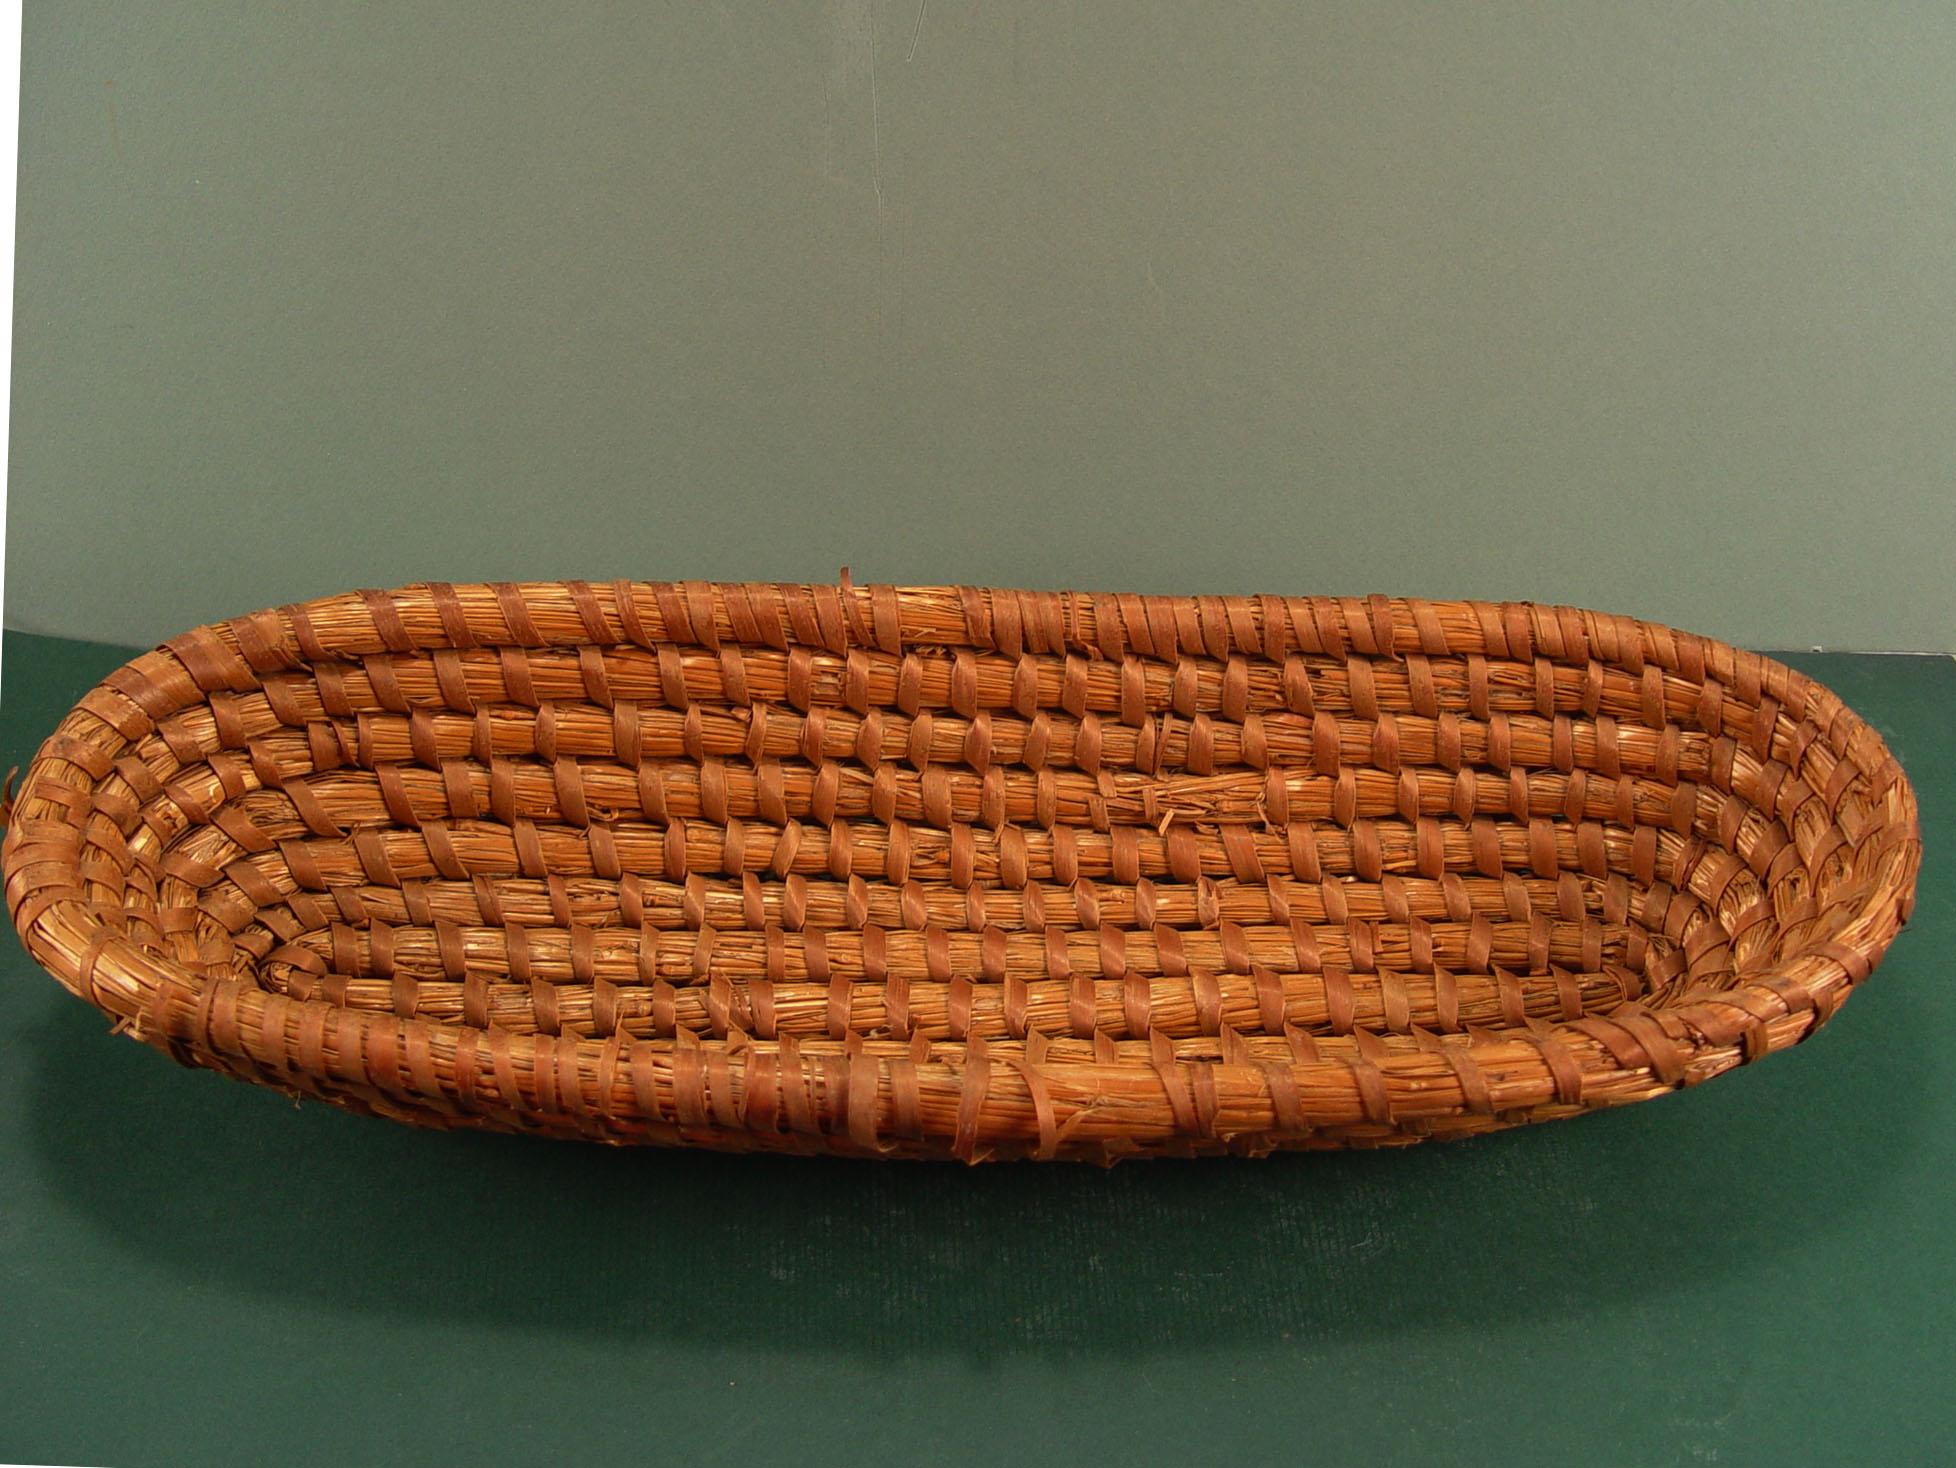 Vintage circa 1920s.coiled rye, straw French bread basket. Some loose and frayed wrappings at top edge.